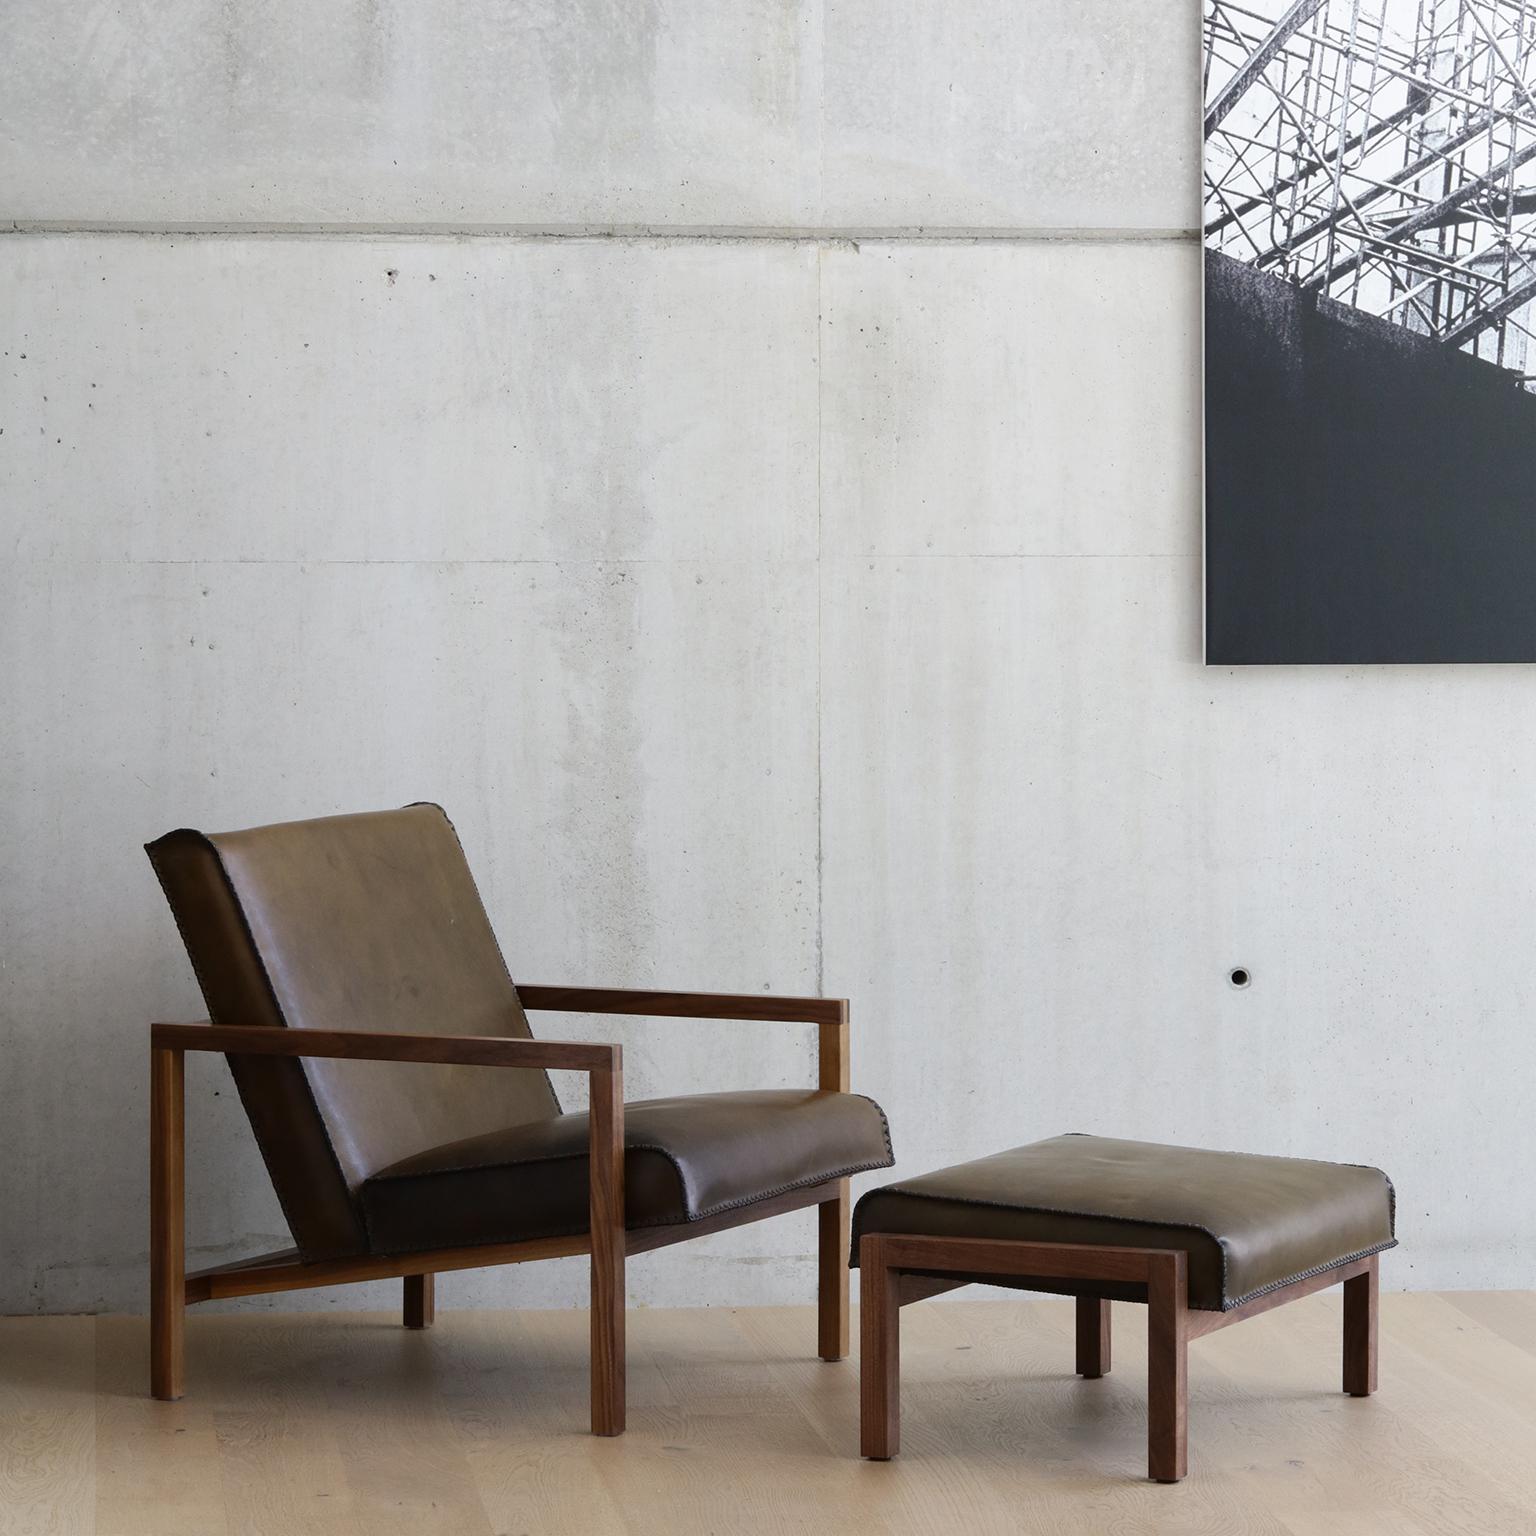 The Vincent lounge chair with matching ottoman set is finely crafted by hand. Shown here the set is displayed in olive green heritage leather on a black walnut frame. 

This Classic lounge chair profile is made unique with the use of our signature